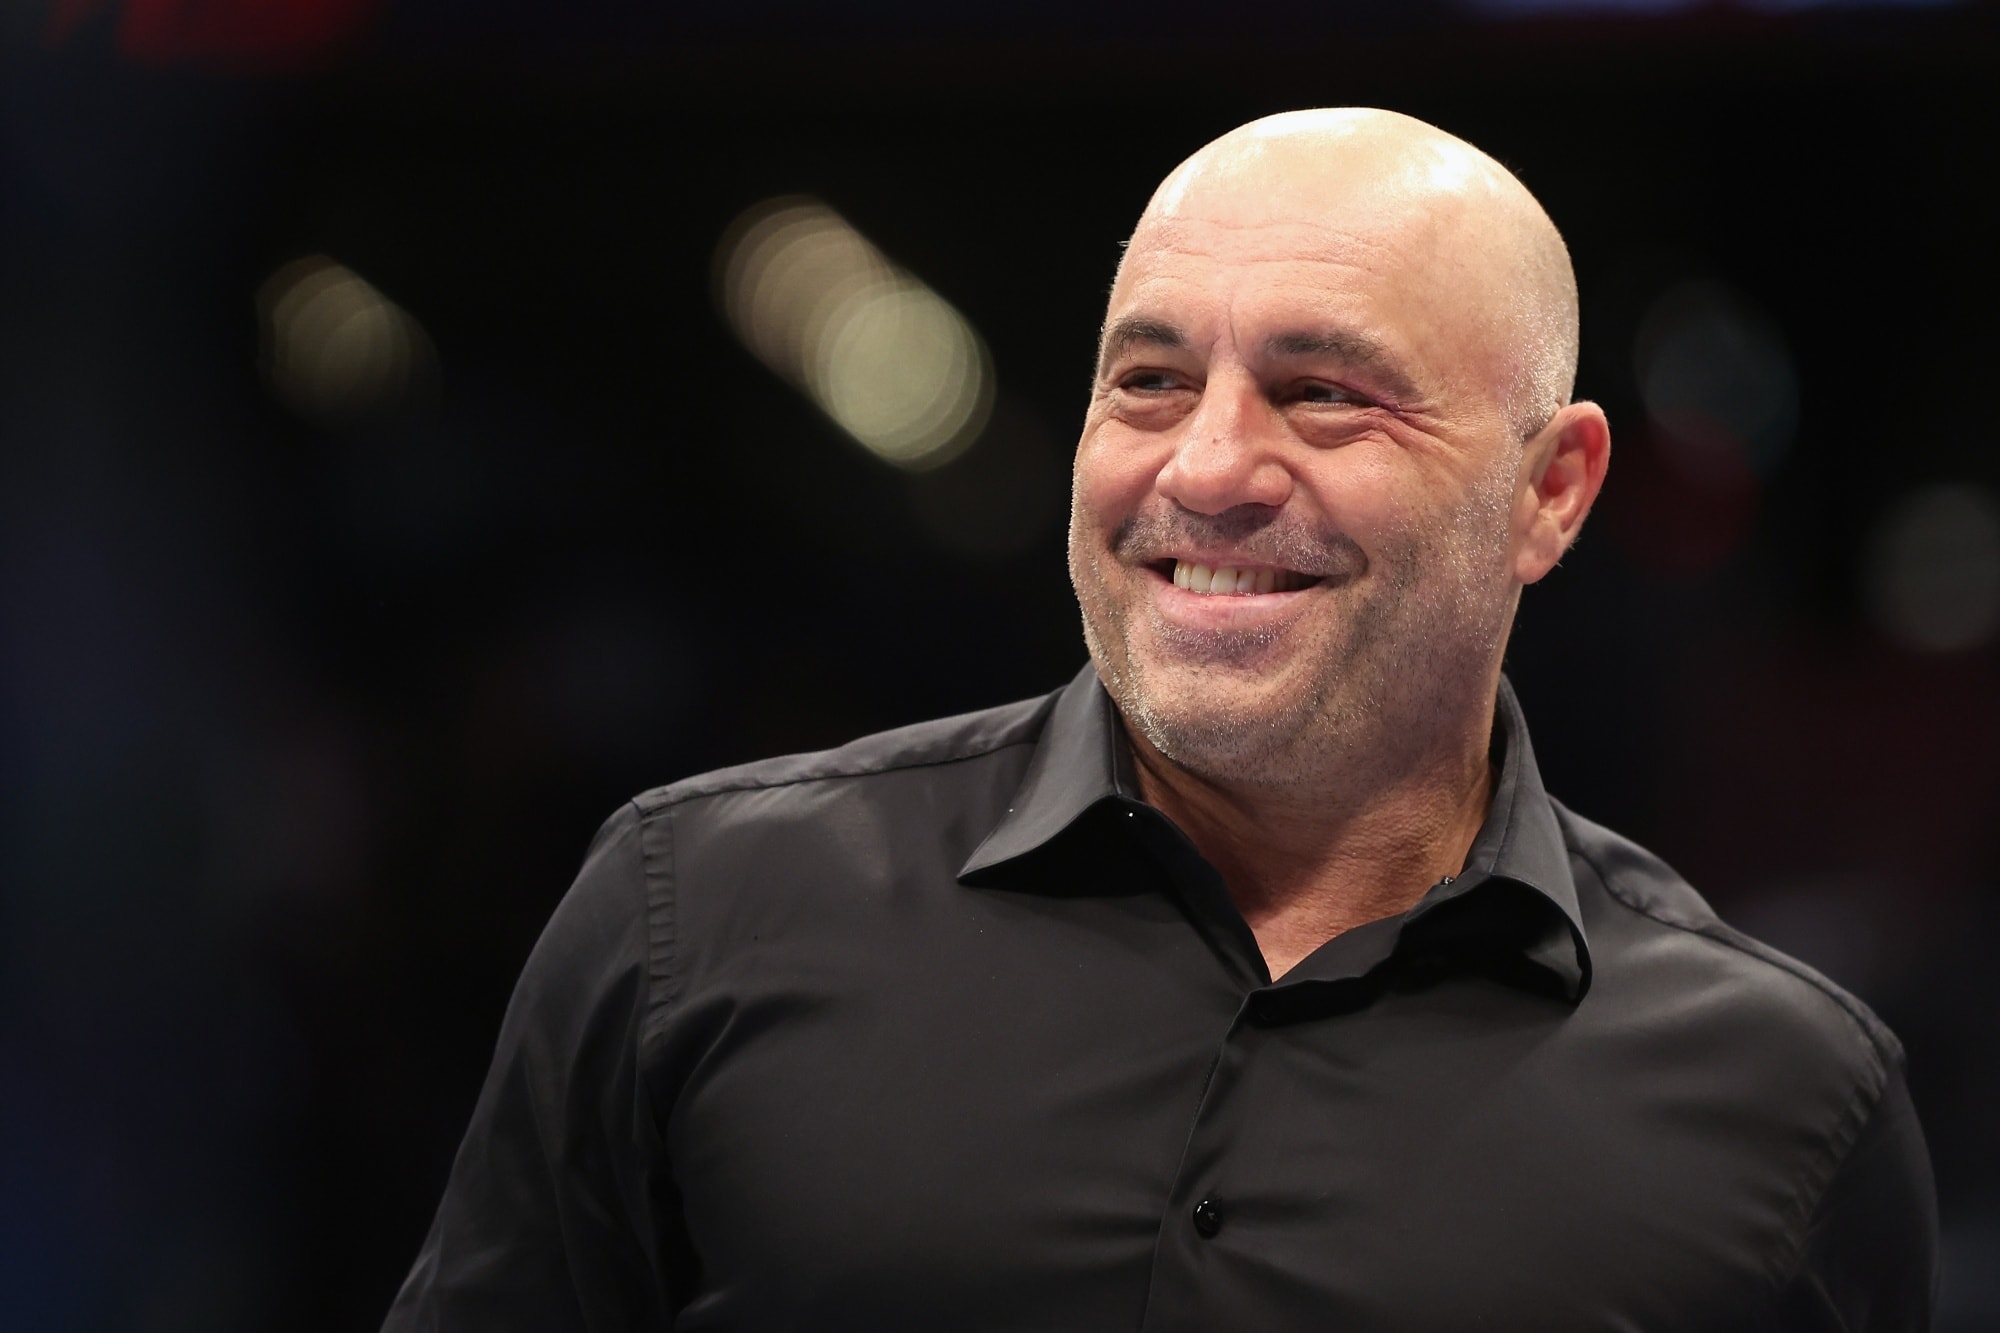 Rogan renews his contract with Spotify (Credits: Bloomberg)